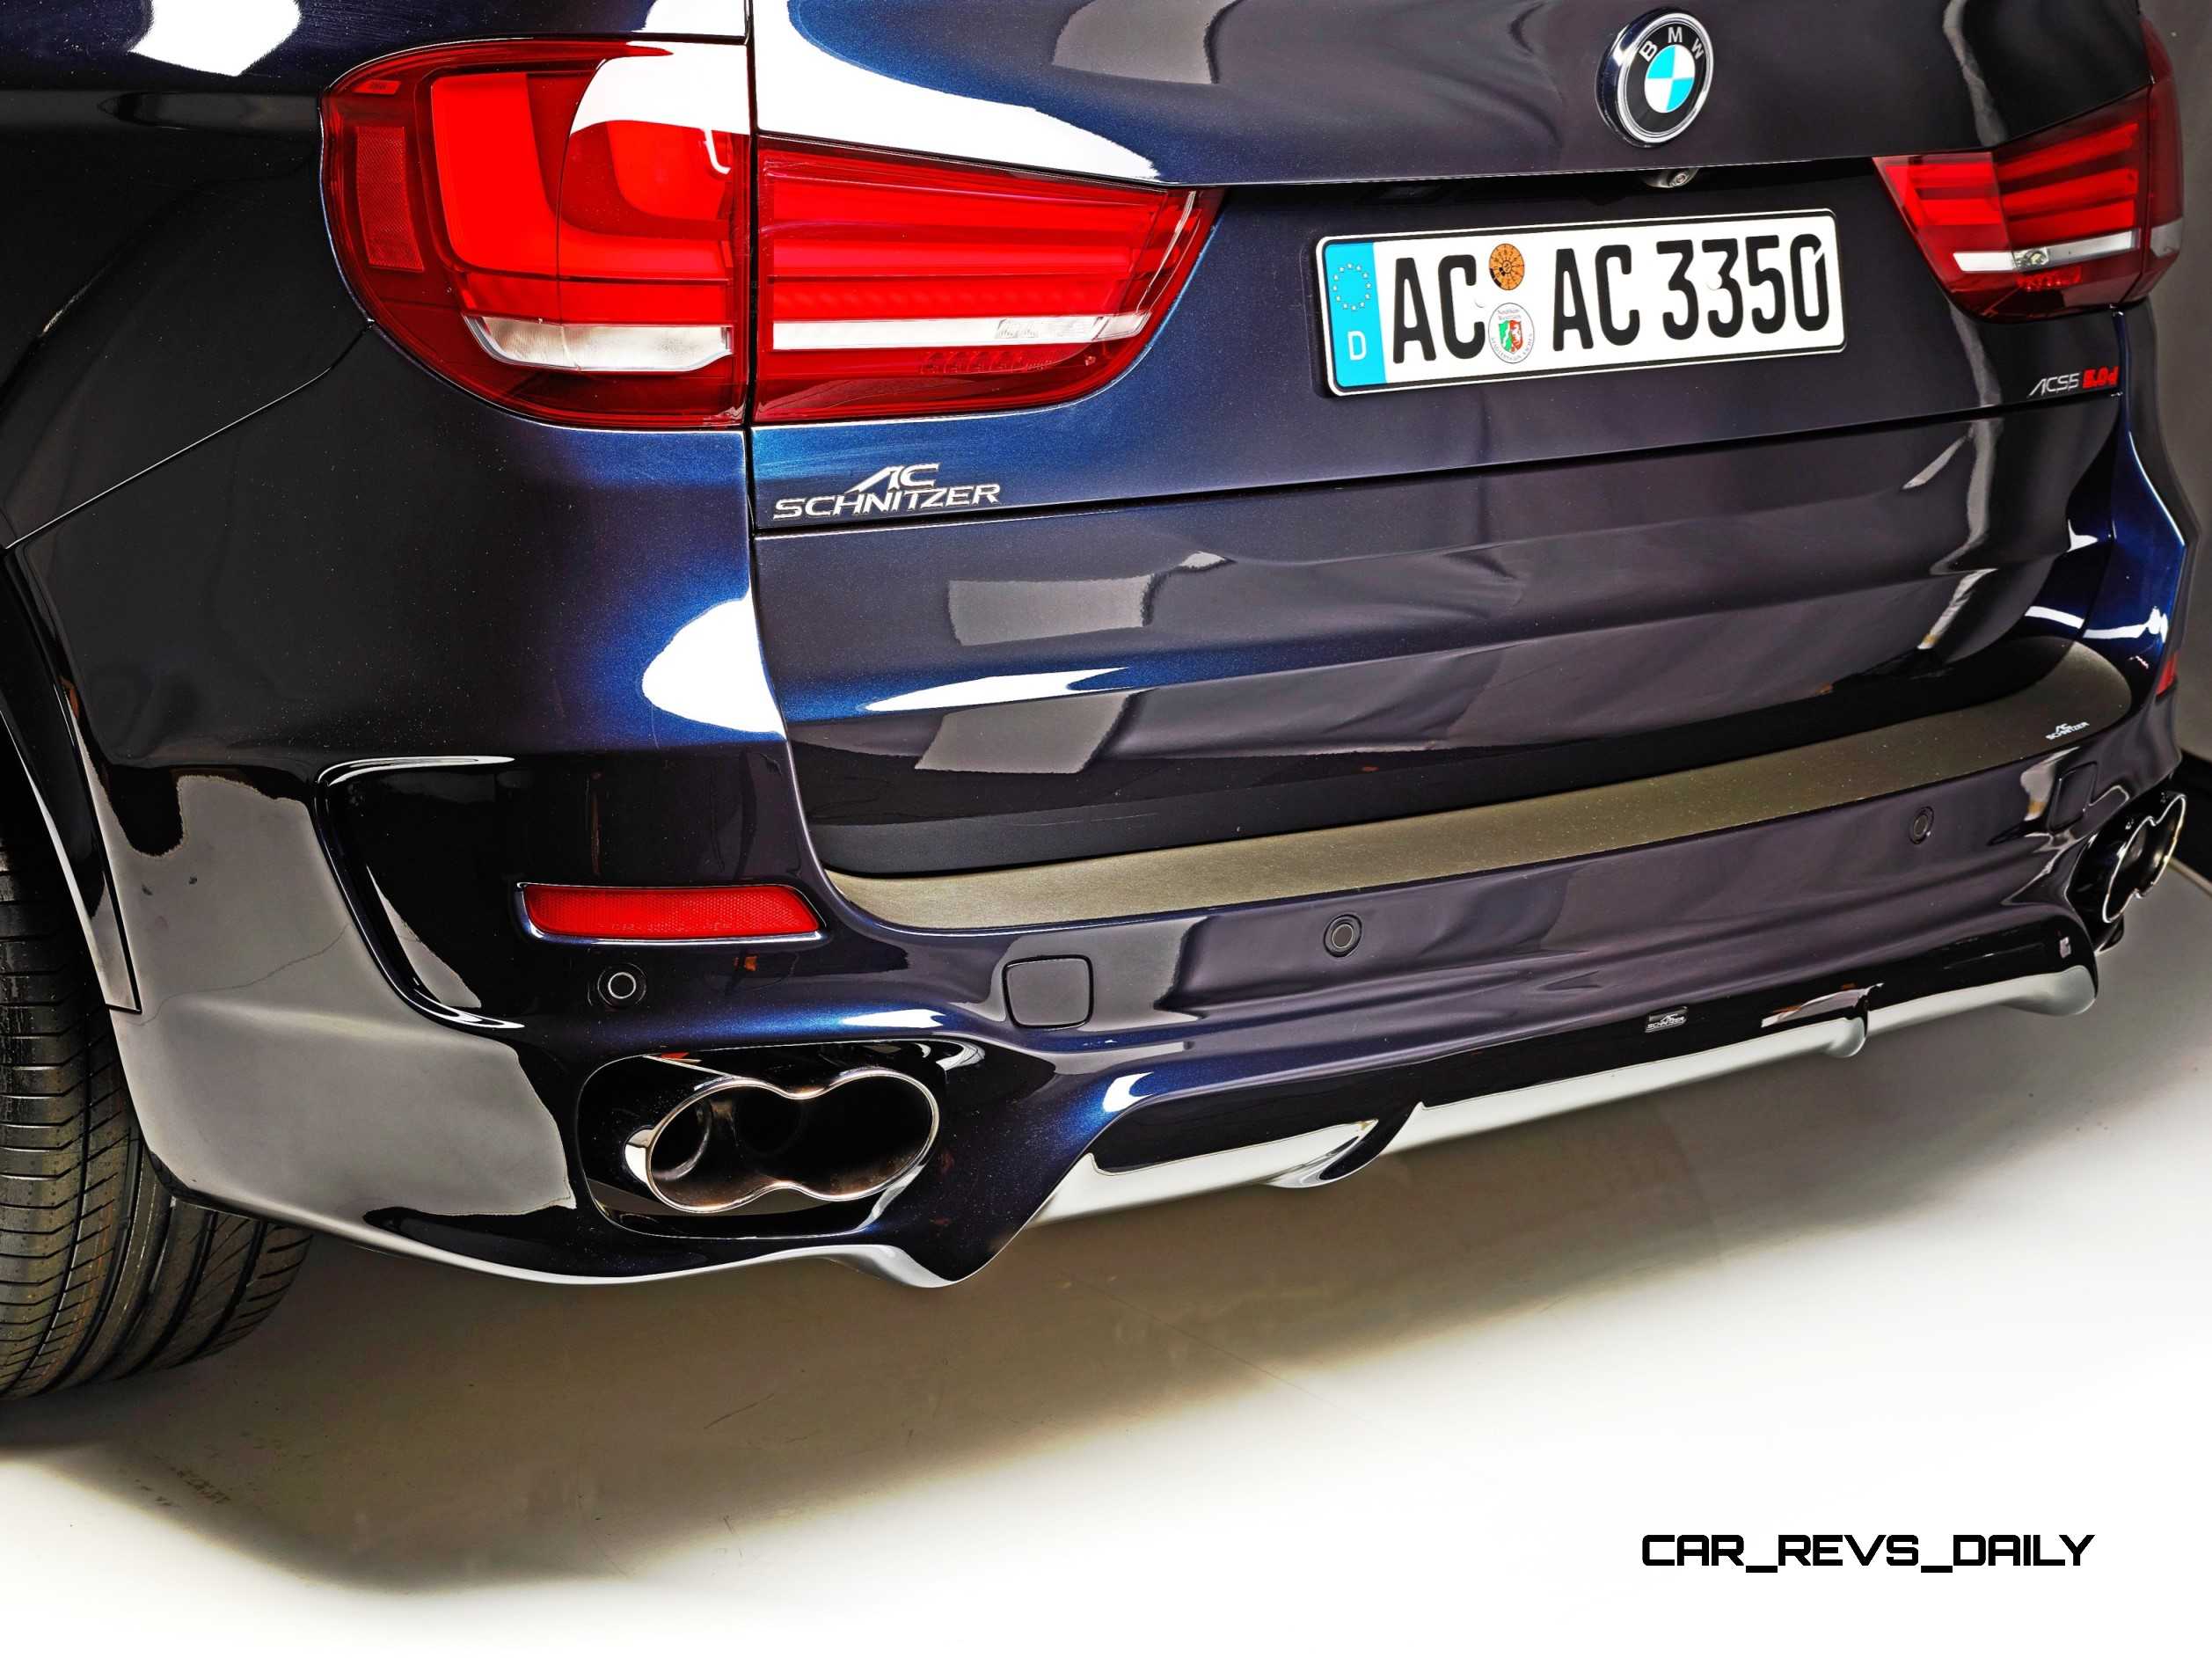 2014 Bmw X5 M50D Wallpapers